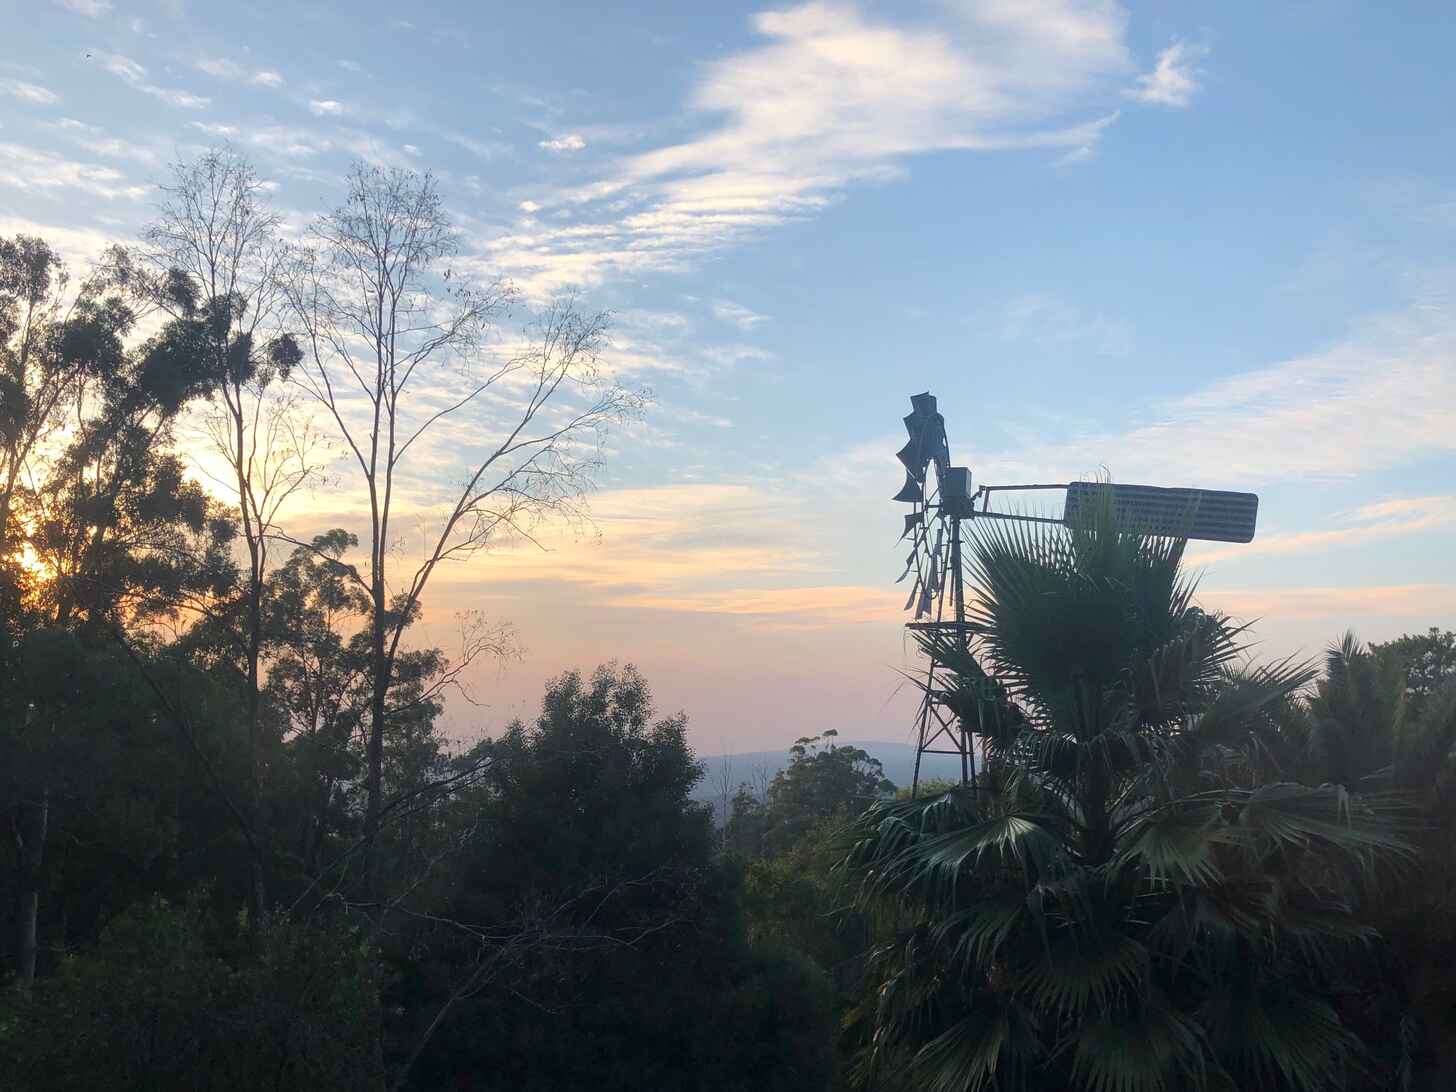 Photo of a sunrise with trees and windmill visible